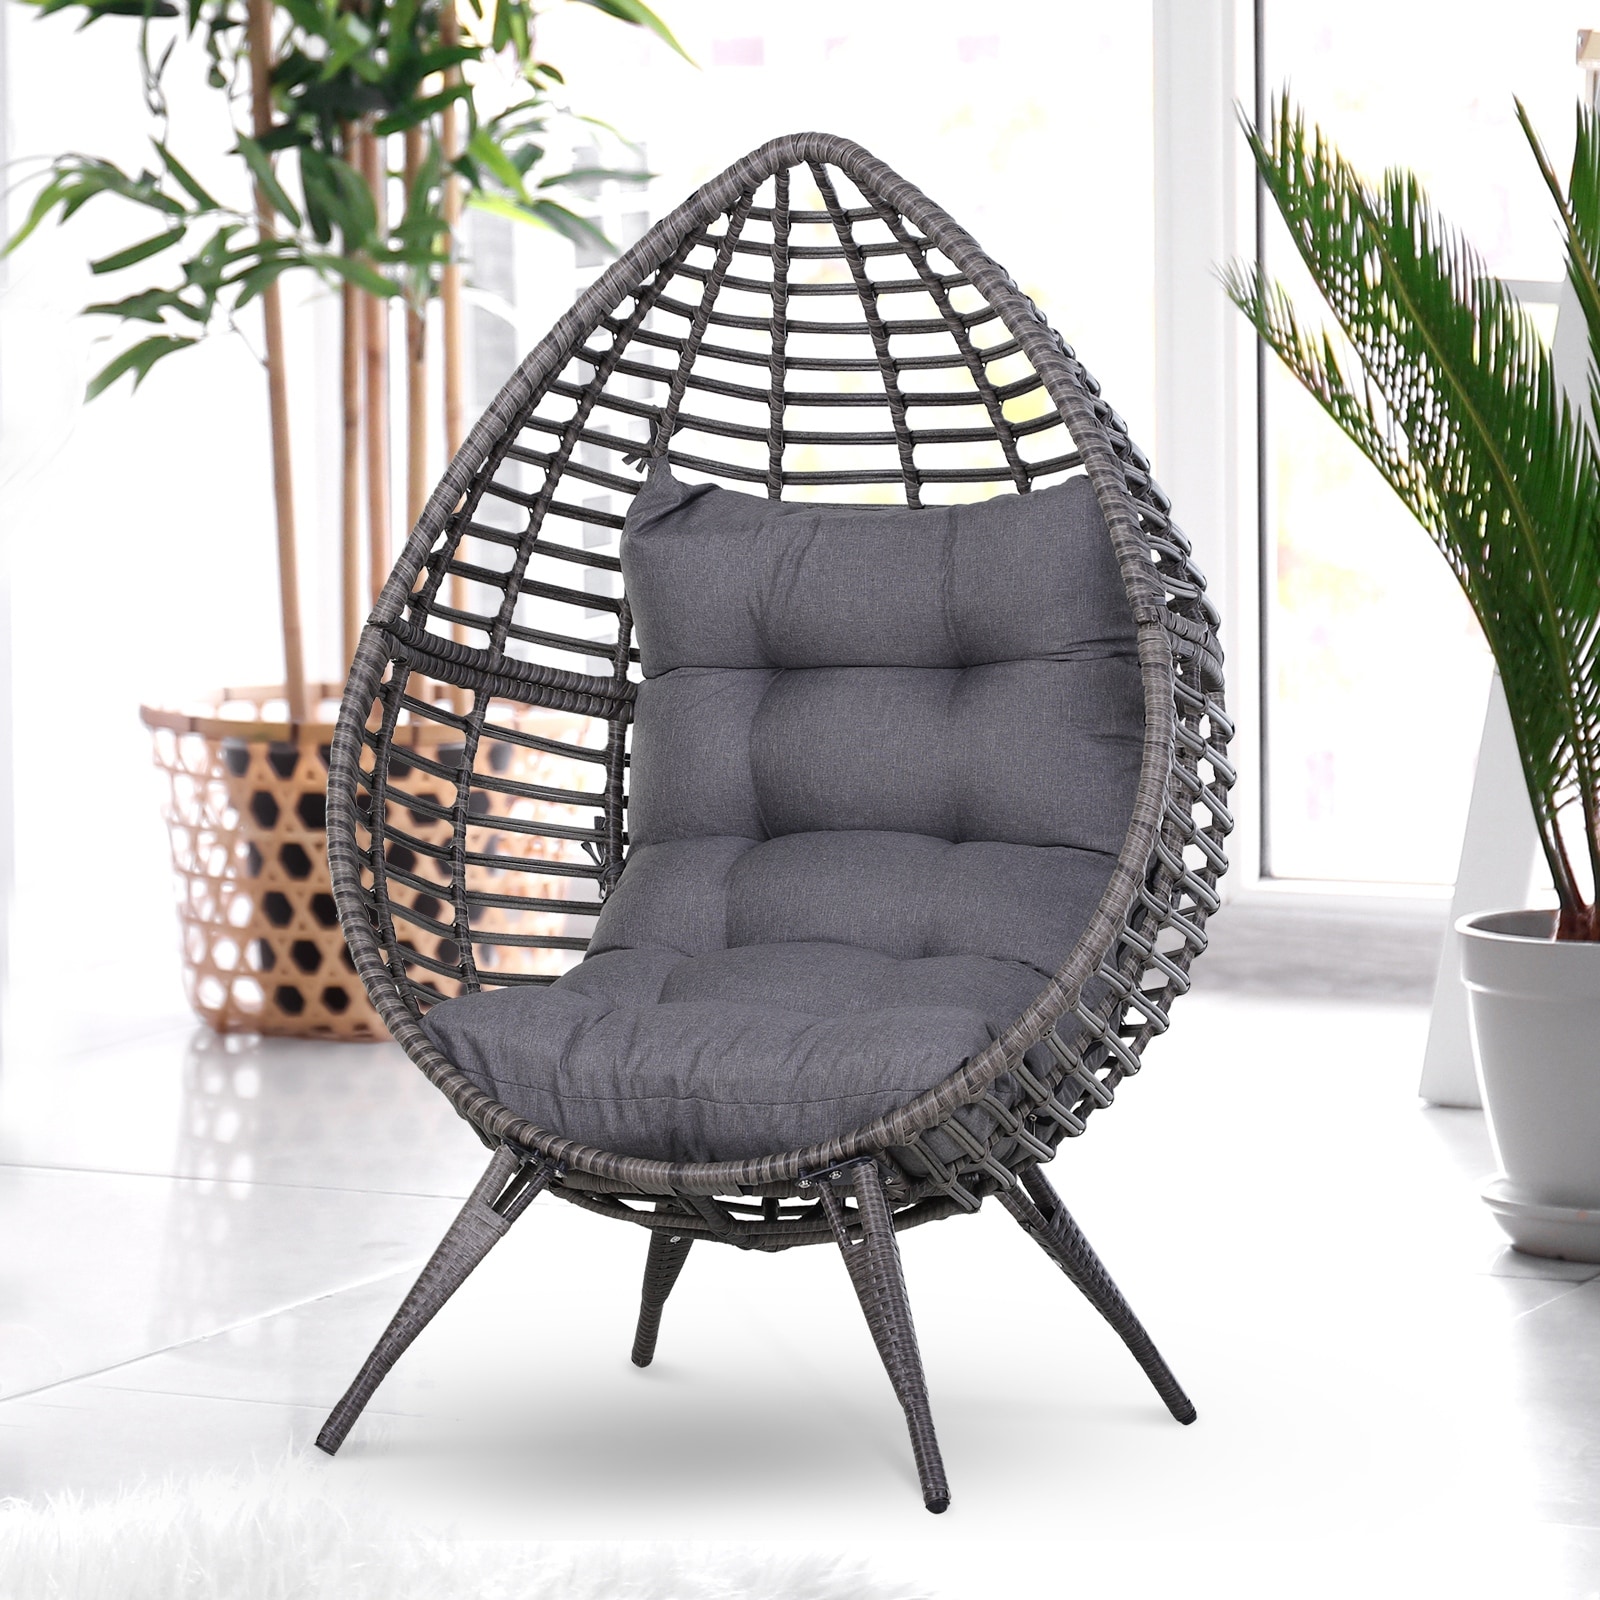 Outsunny Patio Wicker Egg Chair W/ Soft Cushion  Teardrop Cuddle Seat  Outdoor / Indoor Patio Chair